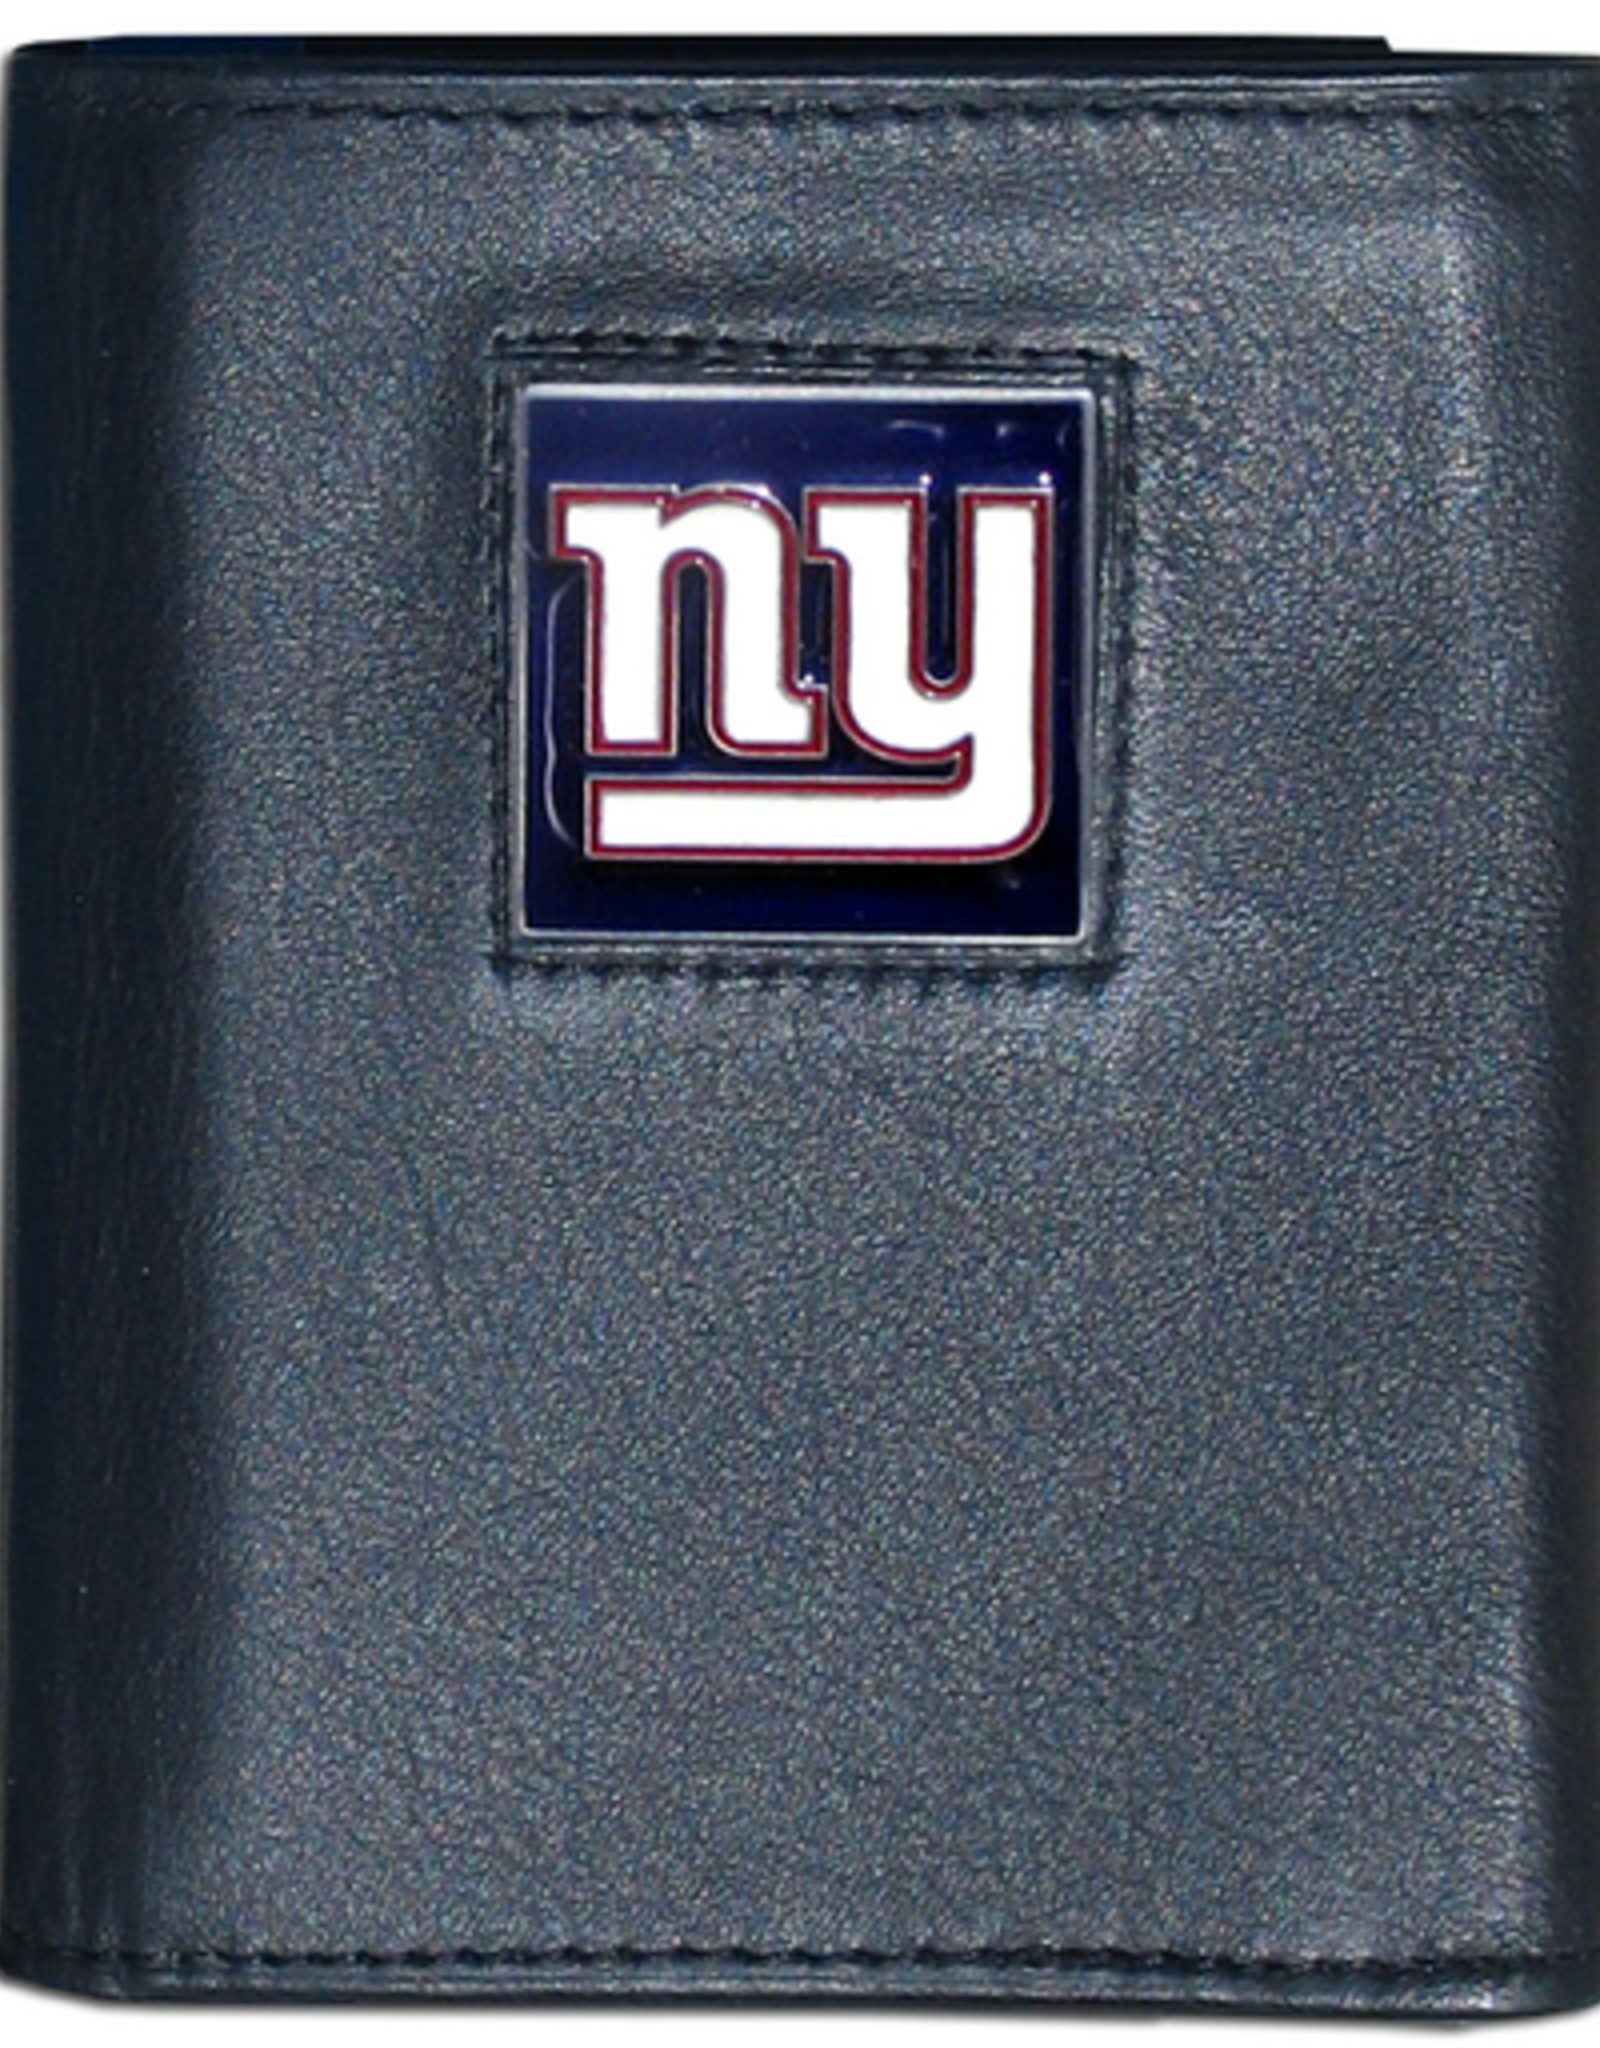 SISKIYOU GIFTS New York Giants Executive Leather Trifold Wallet